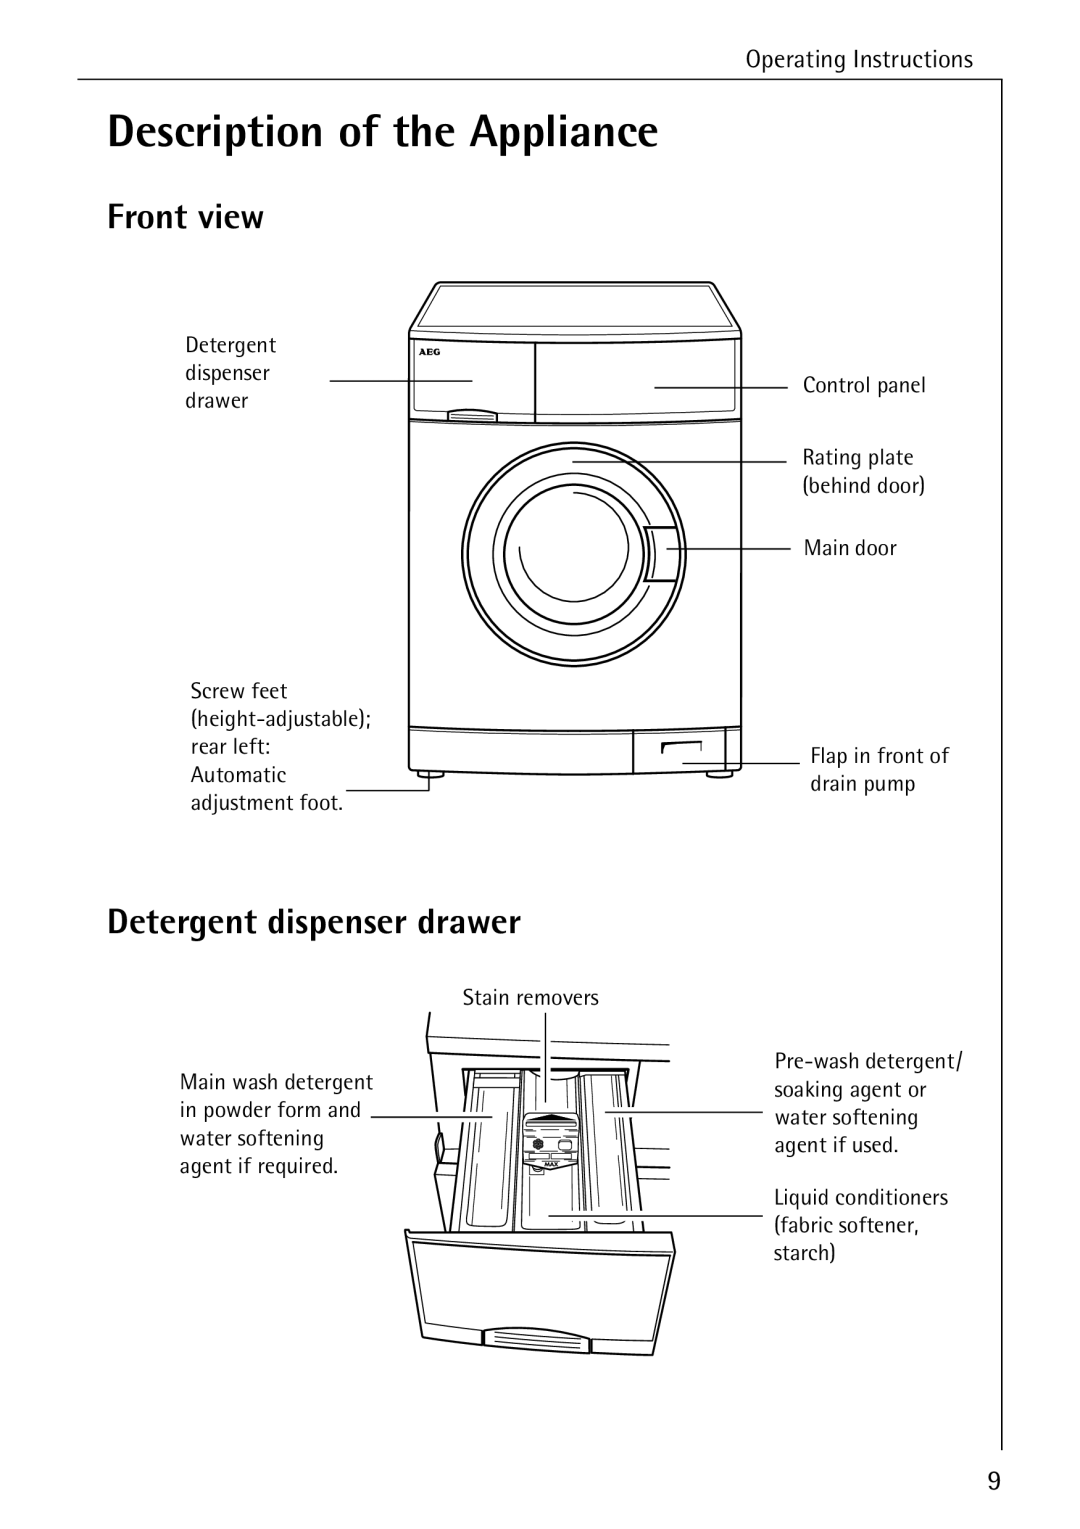 Electrolux 76639 manual Description of the Appliance, Front view, Detergent dispenser drawer, Operating Instructions 